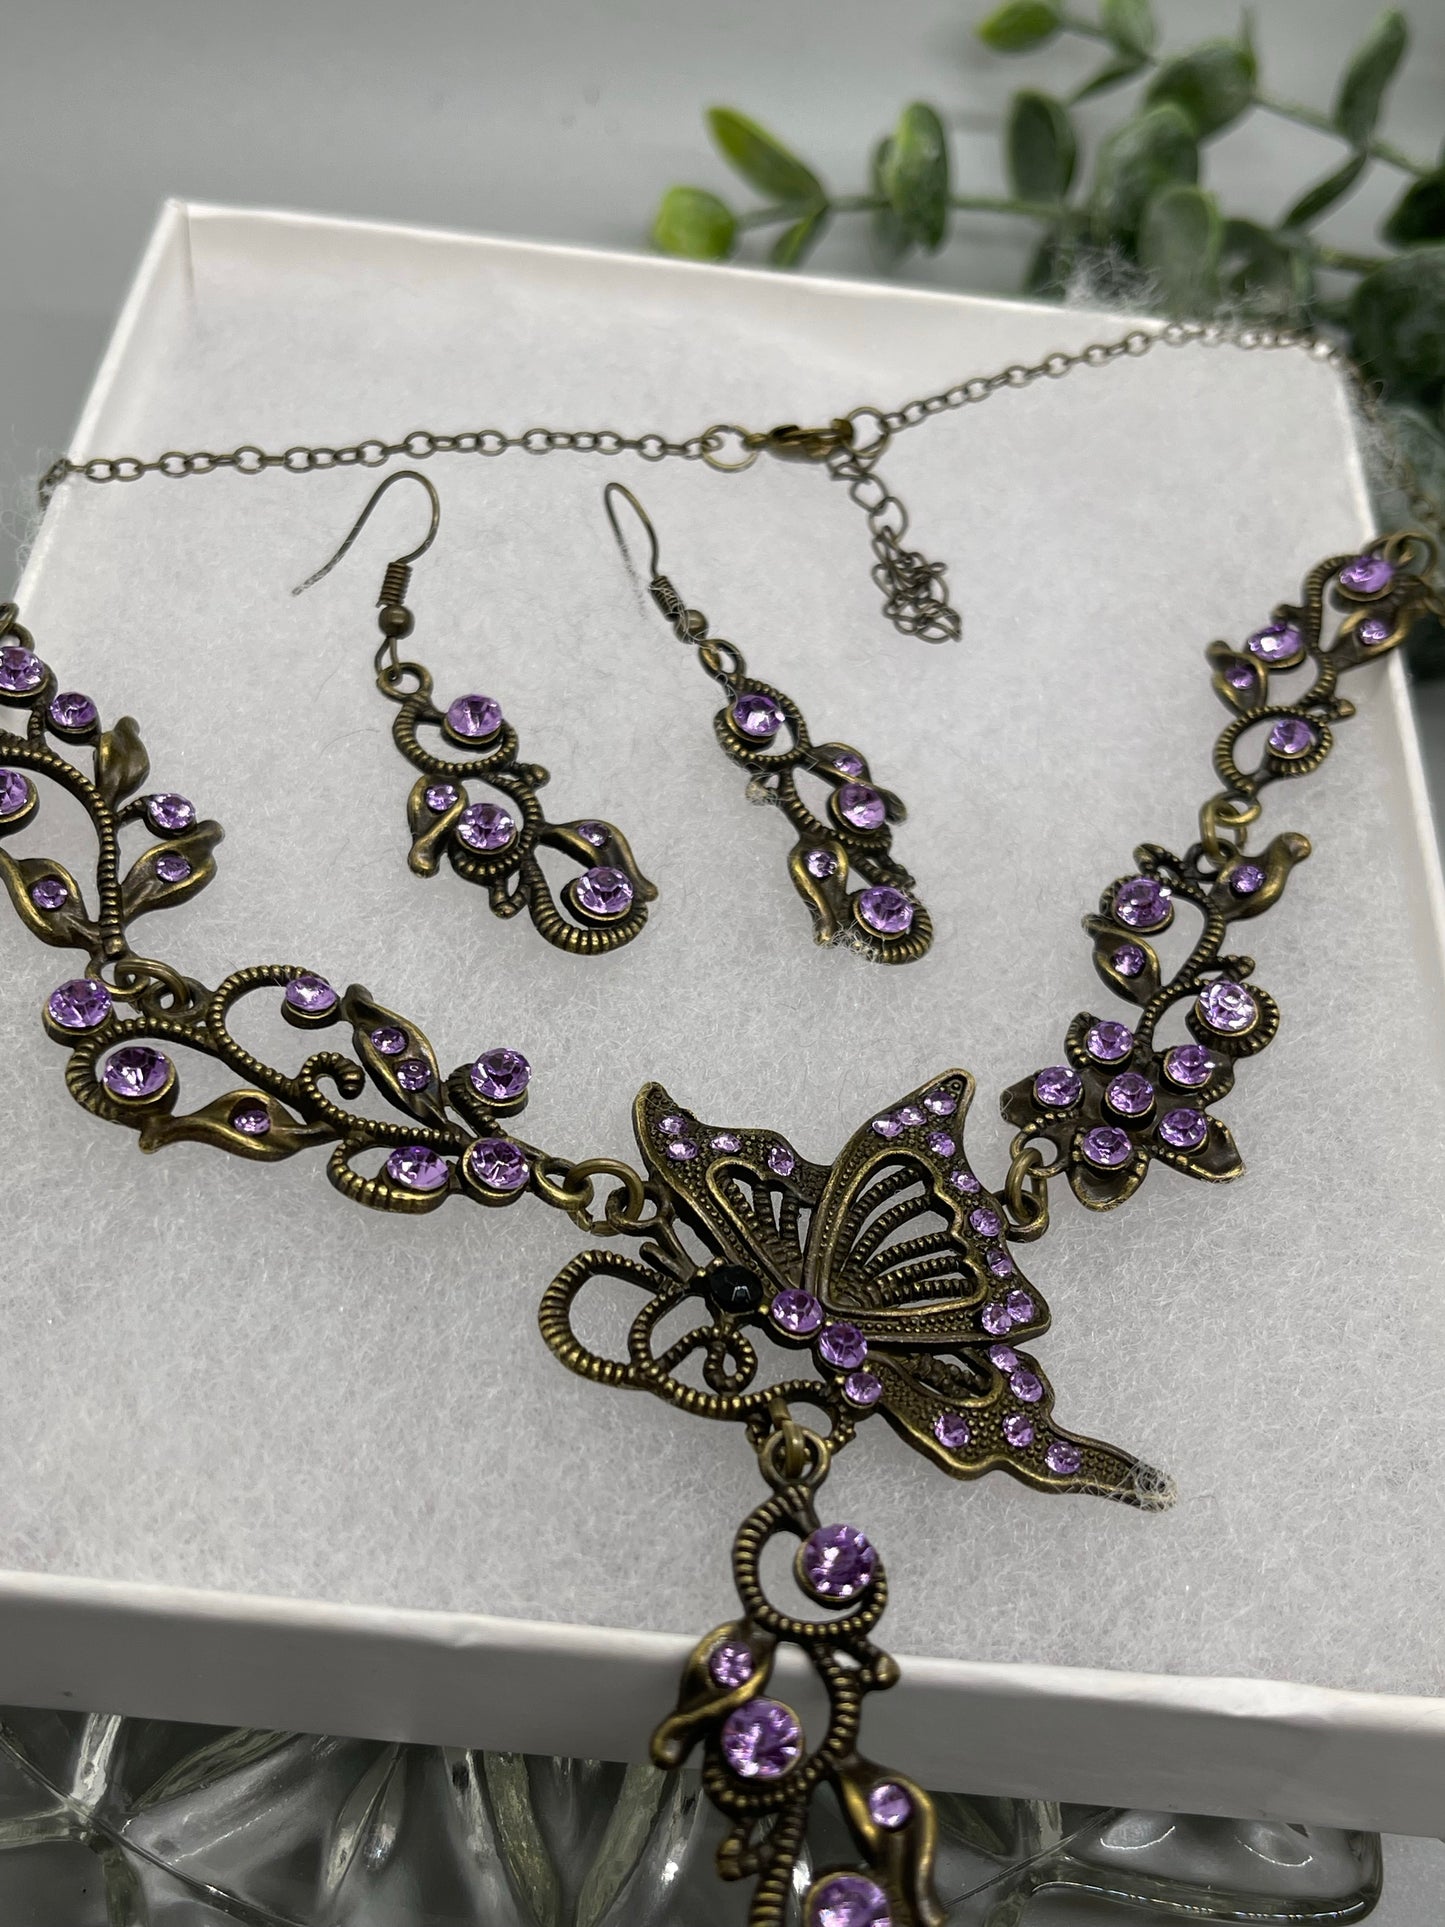 Lavender purple rhinestone crystal necklace earrings set Rhinestone Jewelry Sets earring necklace wedding engagement formal party Prom